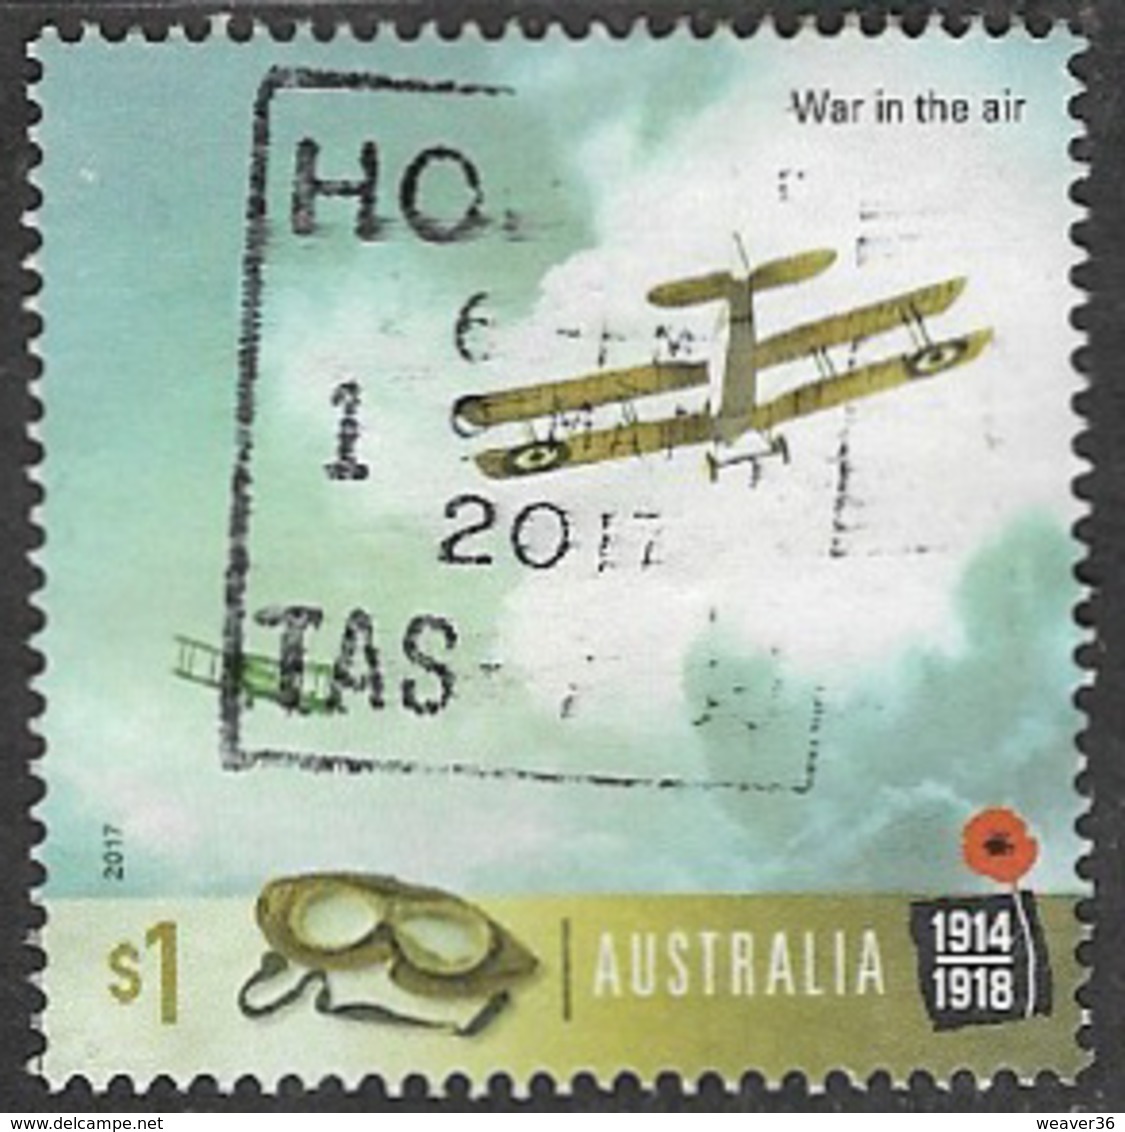 Australia 2017 World War One 1917 $1 Sheet Stamp Type 2 Good/fine Used [39/31910/ND] - Used Stamps